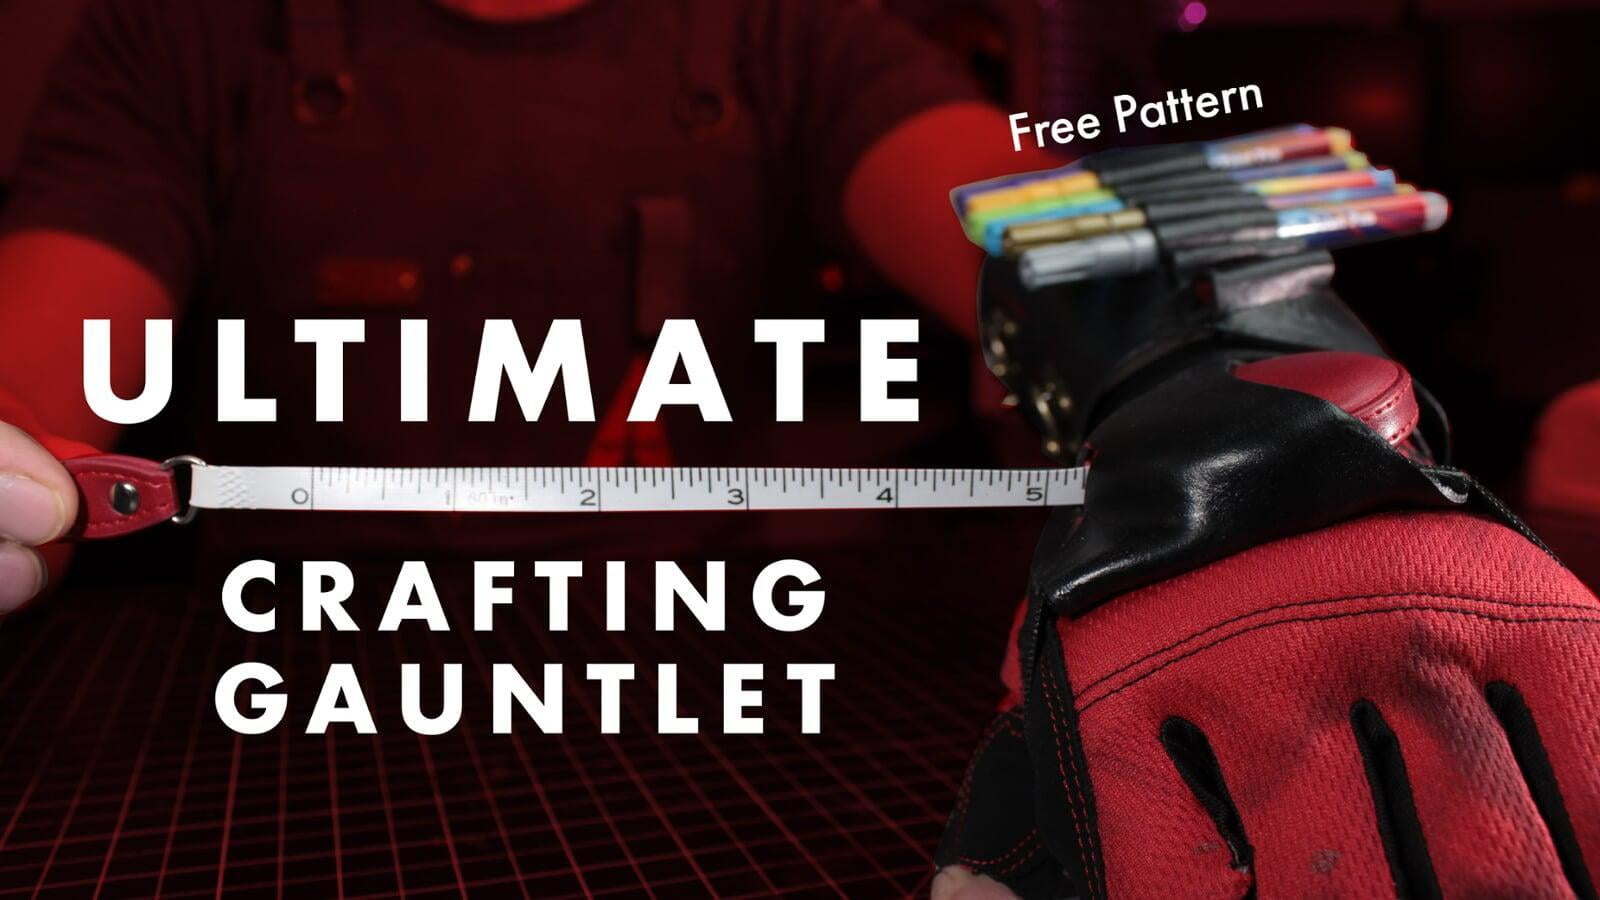 The Ultimate Crafting Gauntlet You Never Knew You Needed - Part 1 | Cosplay Apprentice